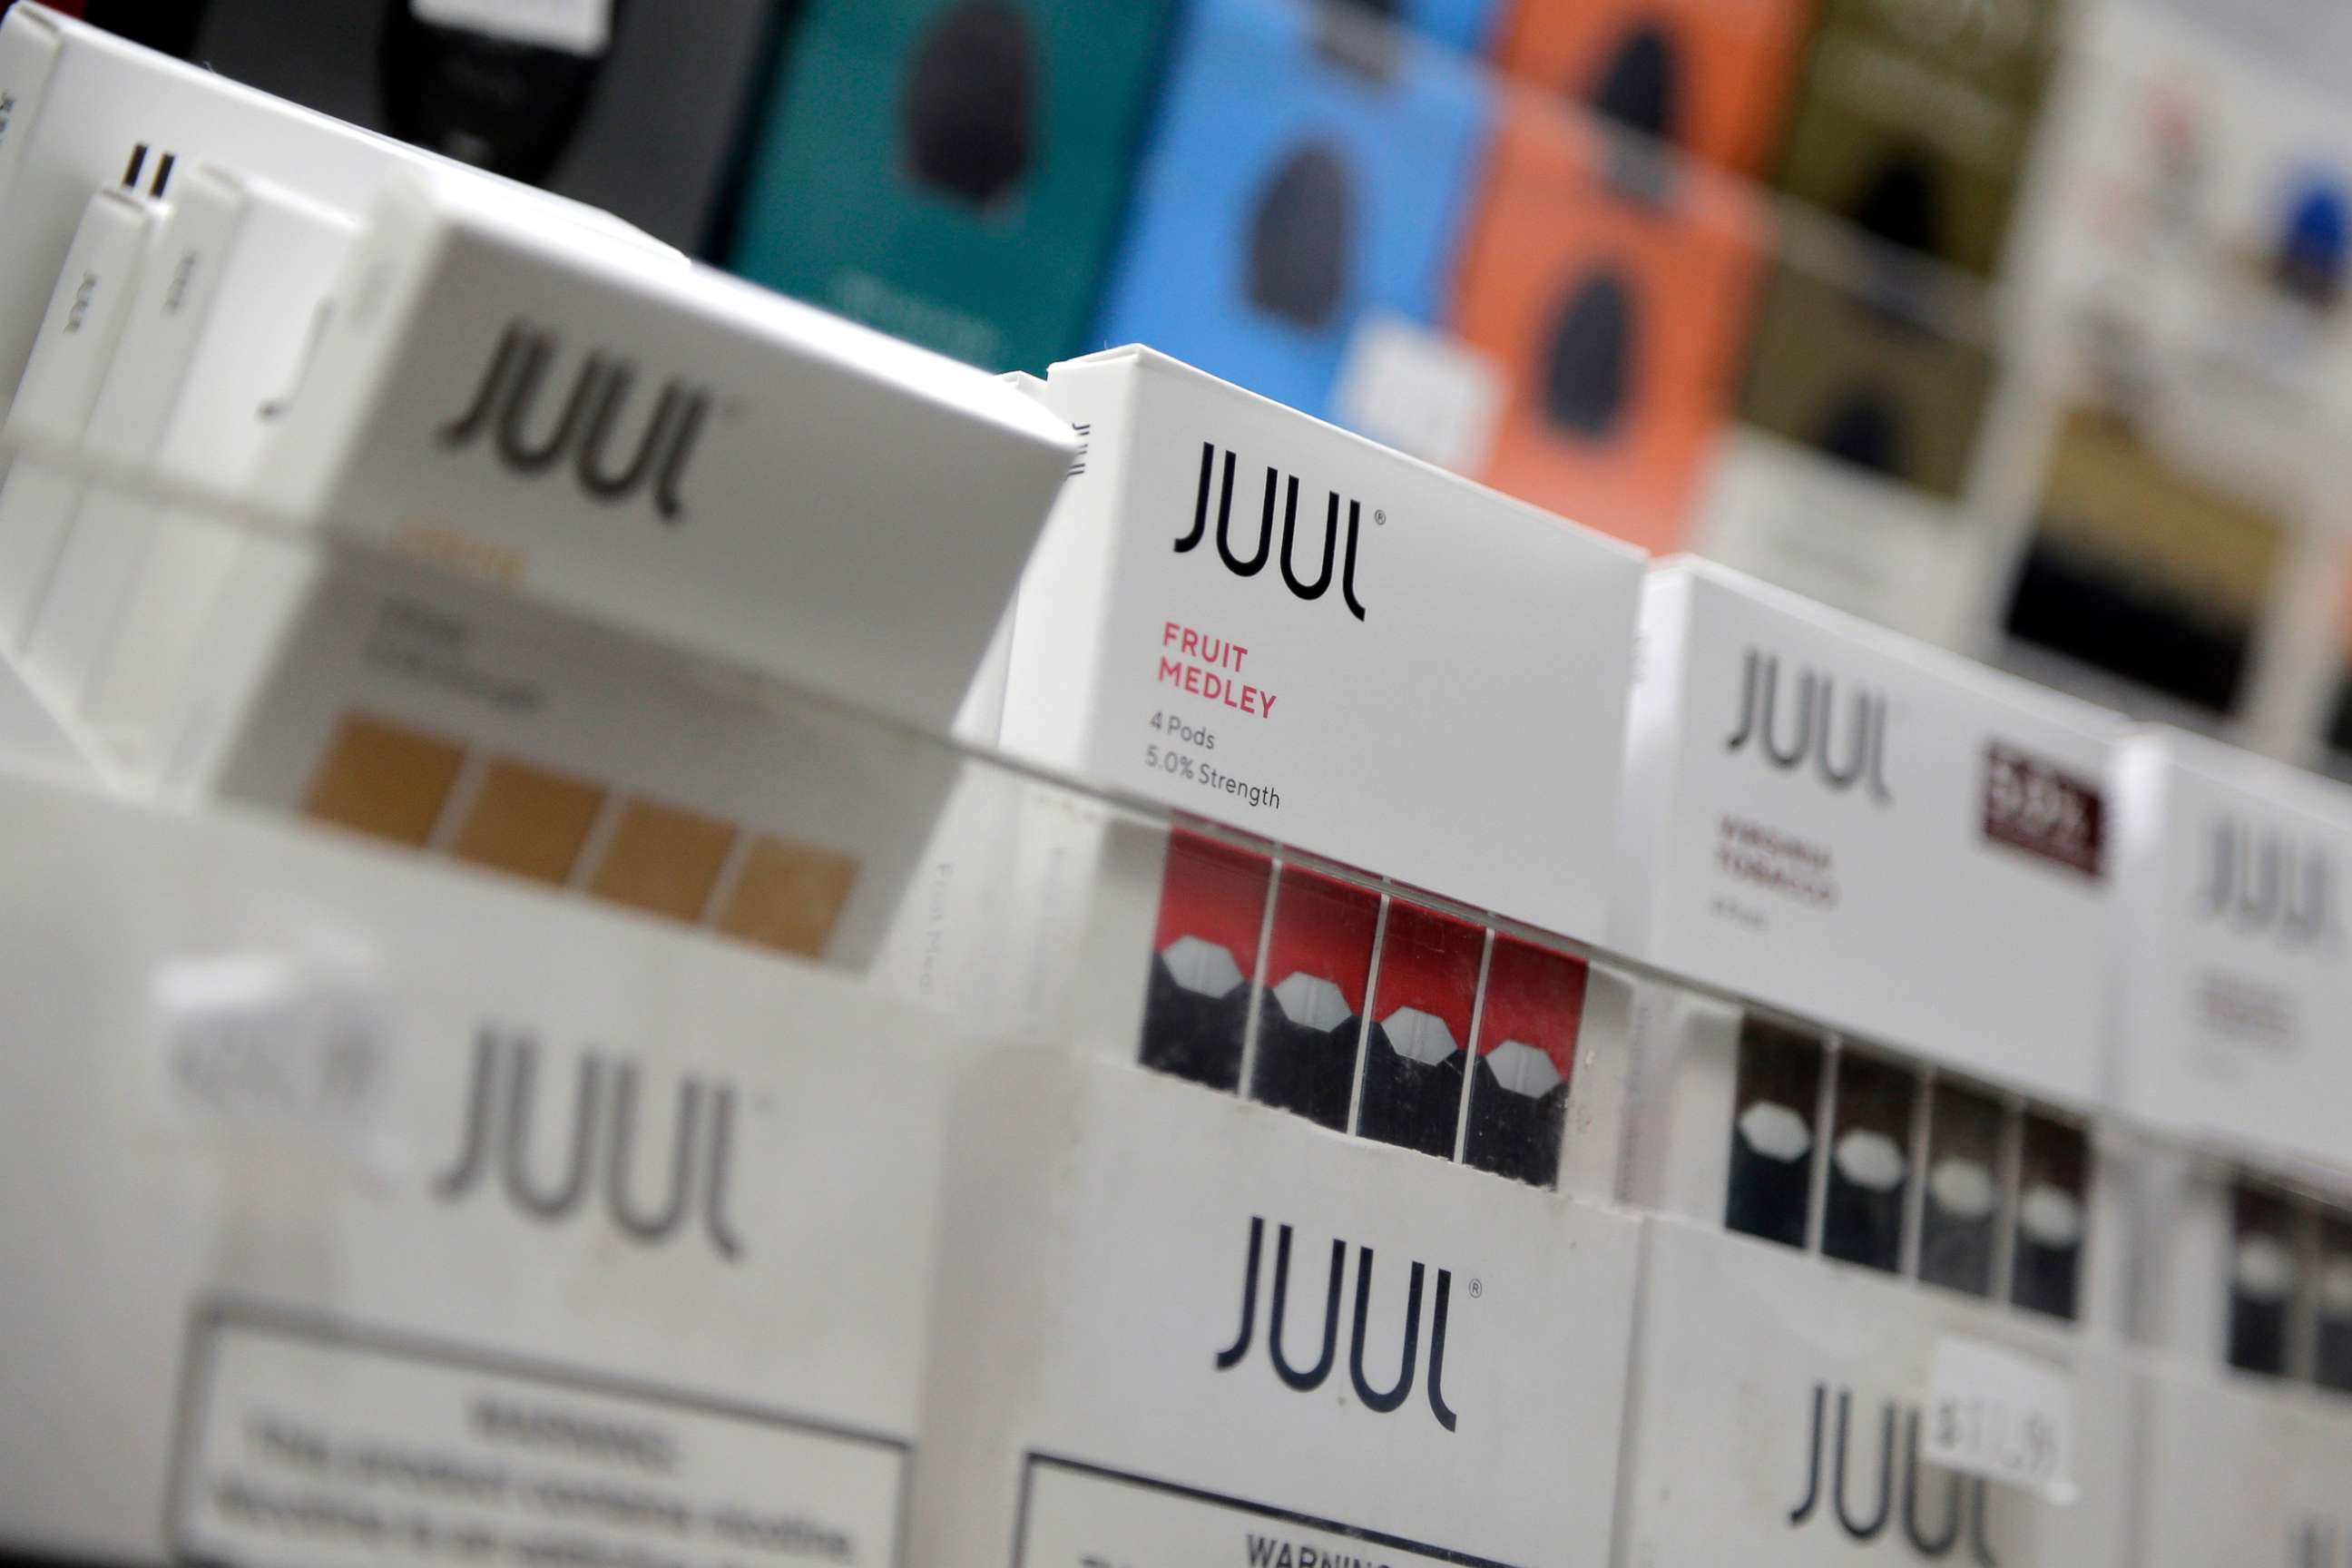 PHOTO: Juul products are displayed at a smoke shop in New York City, Dec. 20, 2018.